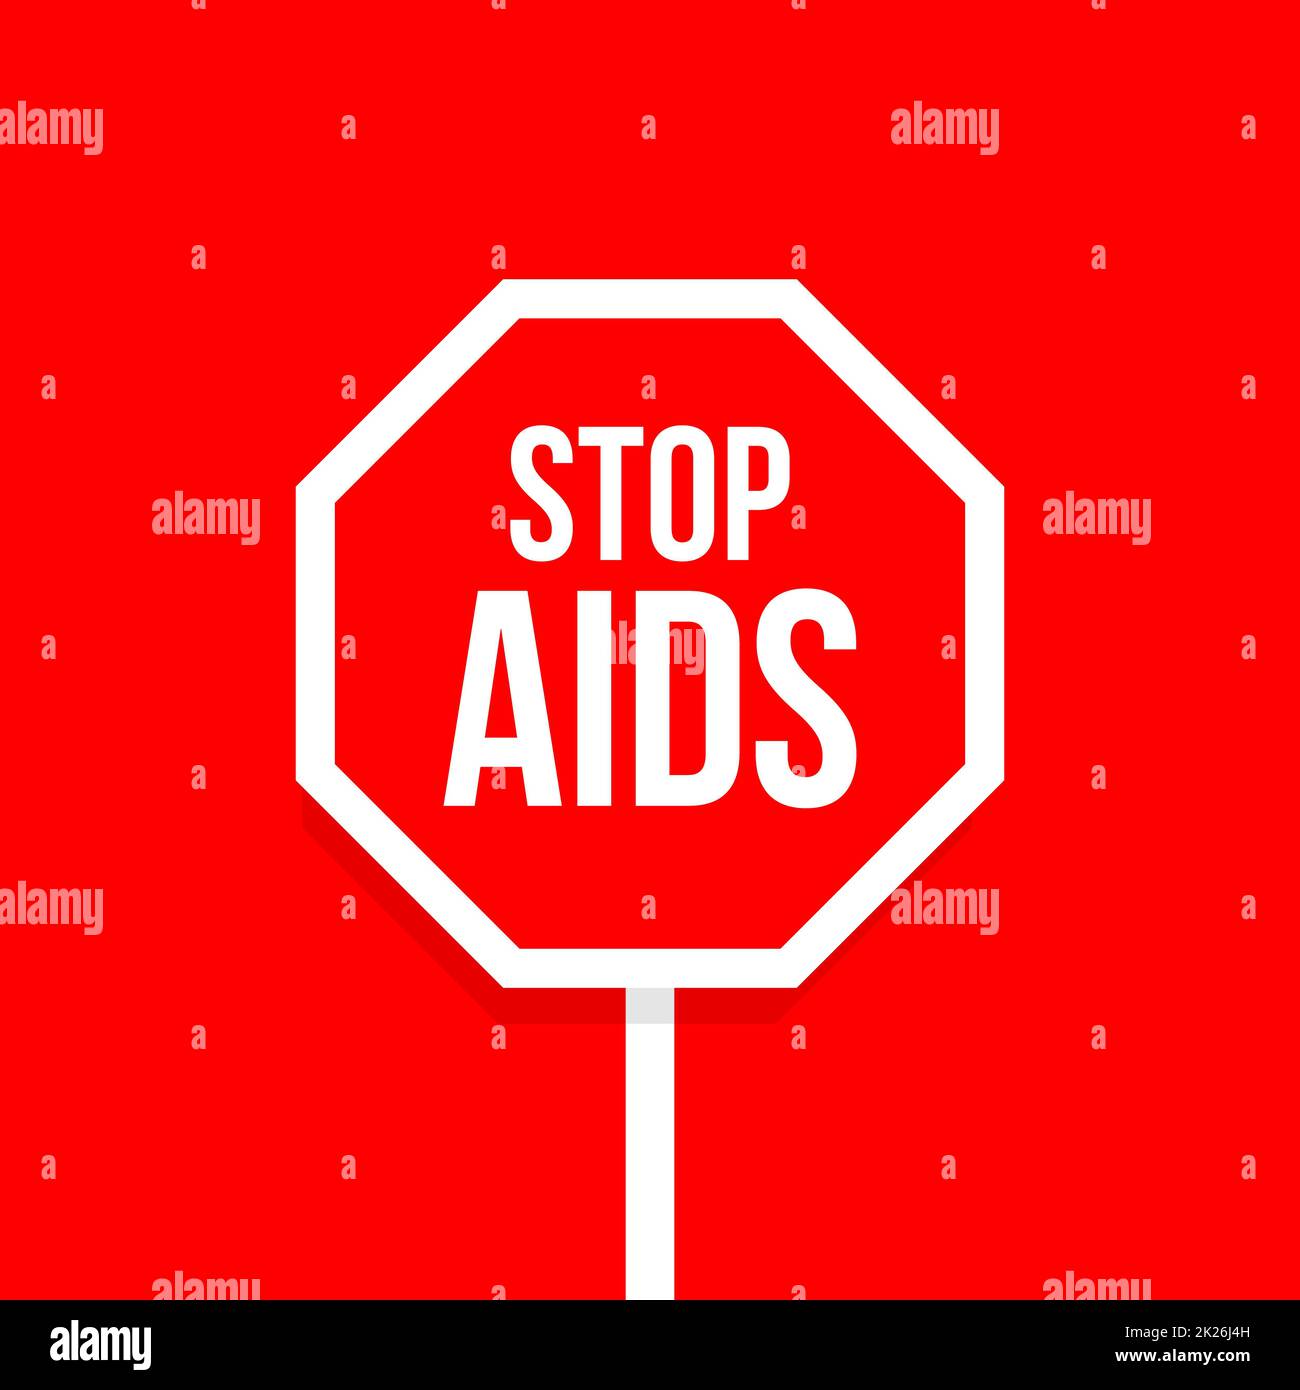 Stop AIDS red octagonal road sign design vector emblem. HIV awareness, care and help charity company logo. Vector illustration. Stock Photo